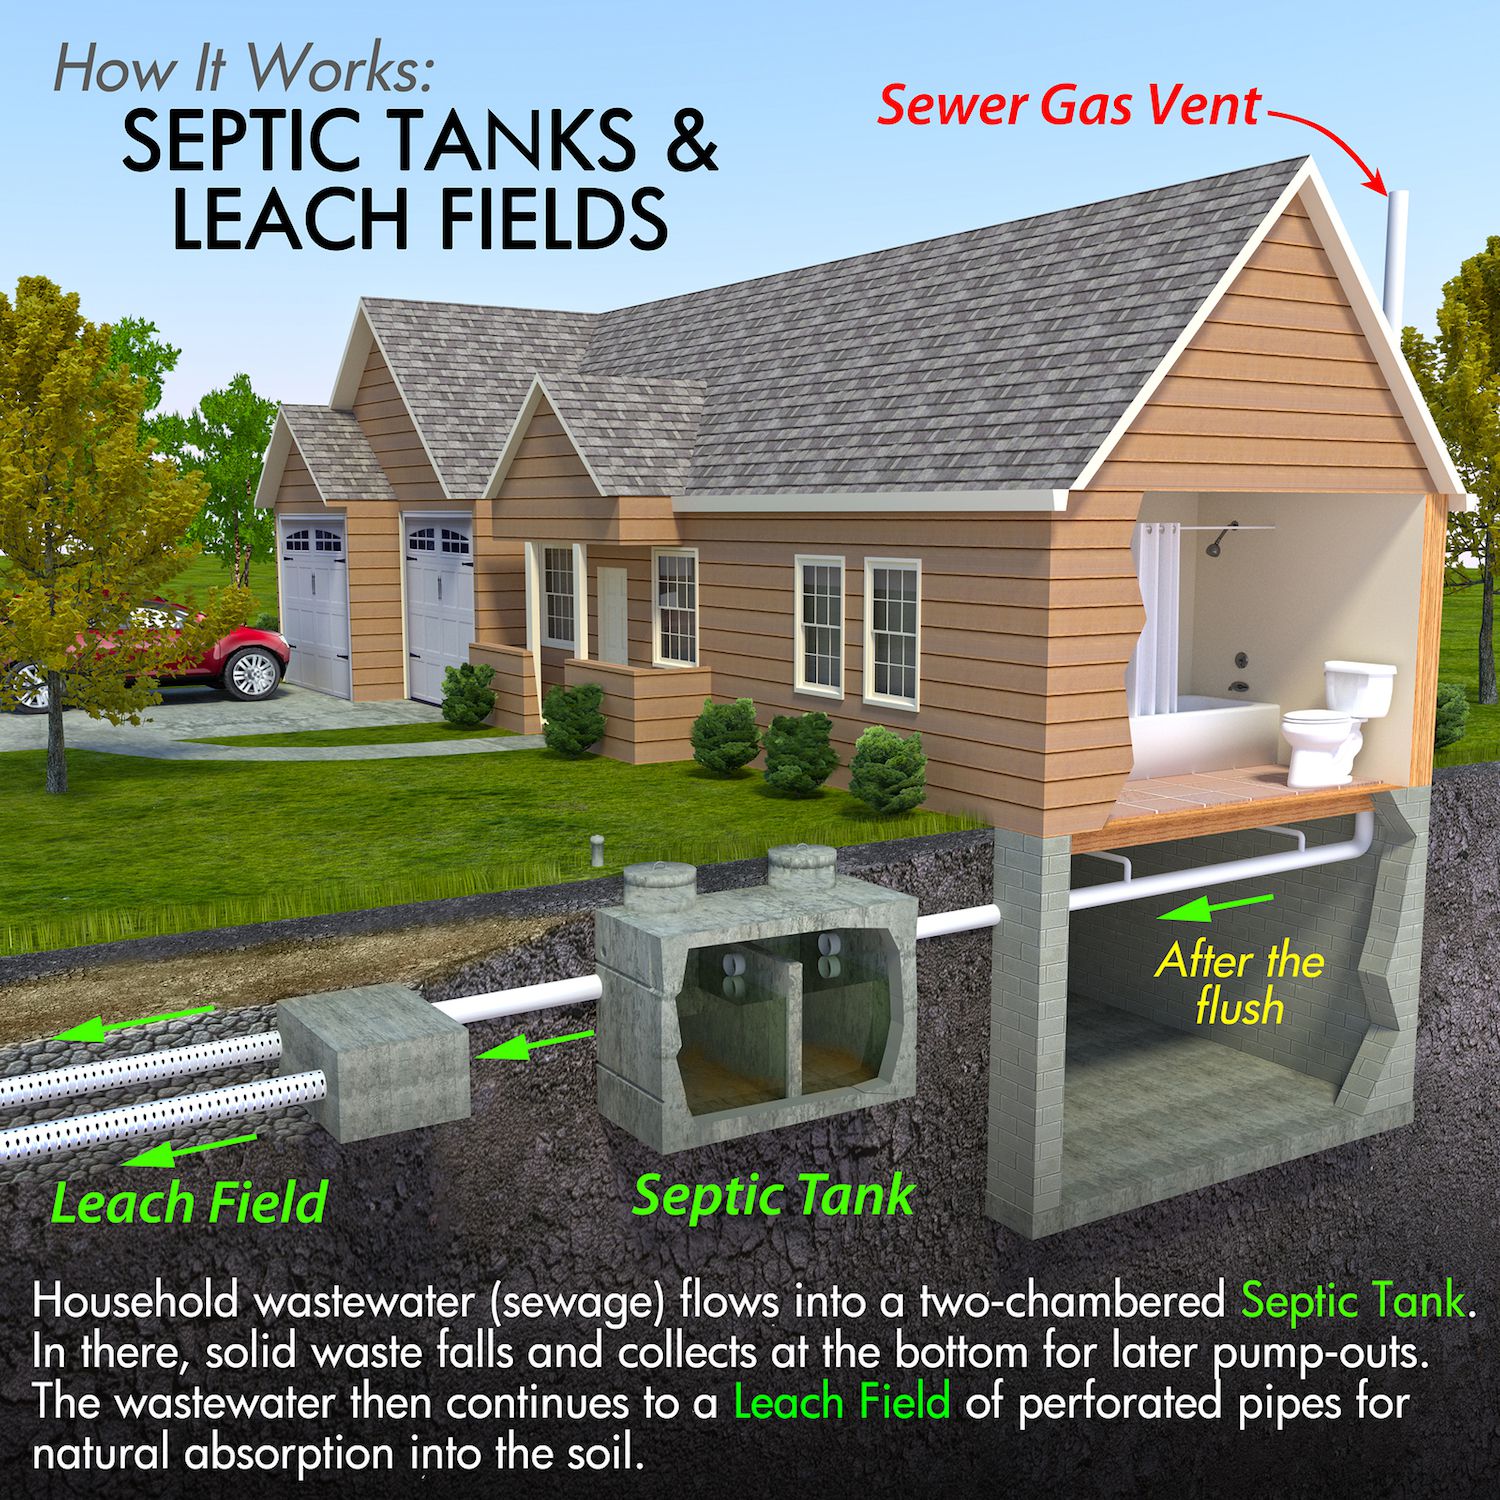 Can small amounts of food in your disposal harm your septic system? Experts answer on Ask MetaFilter